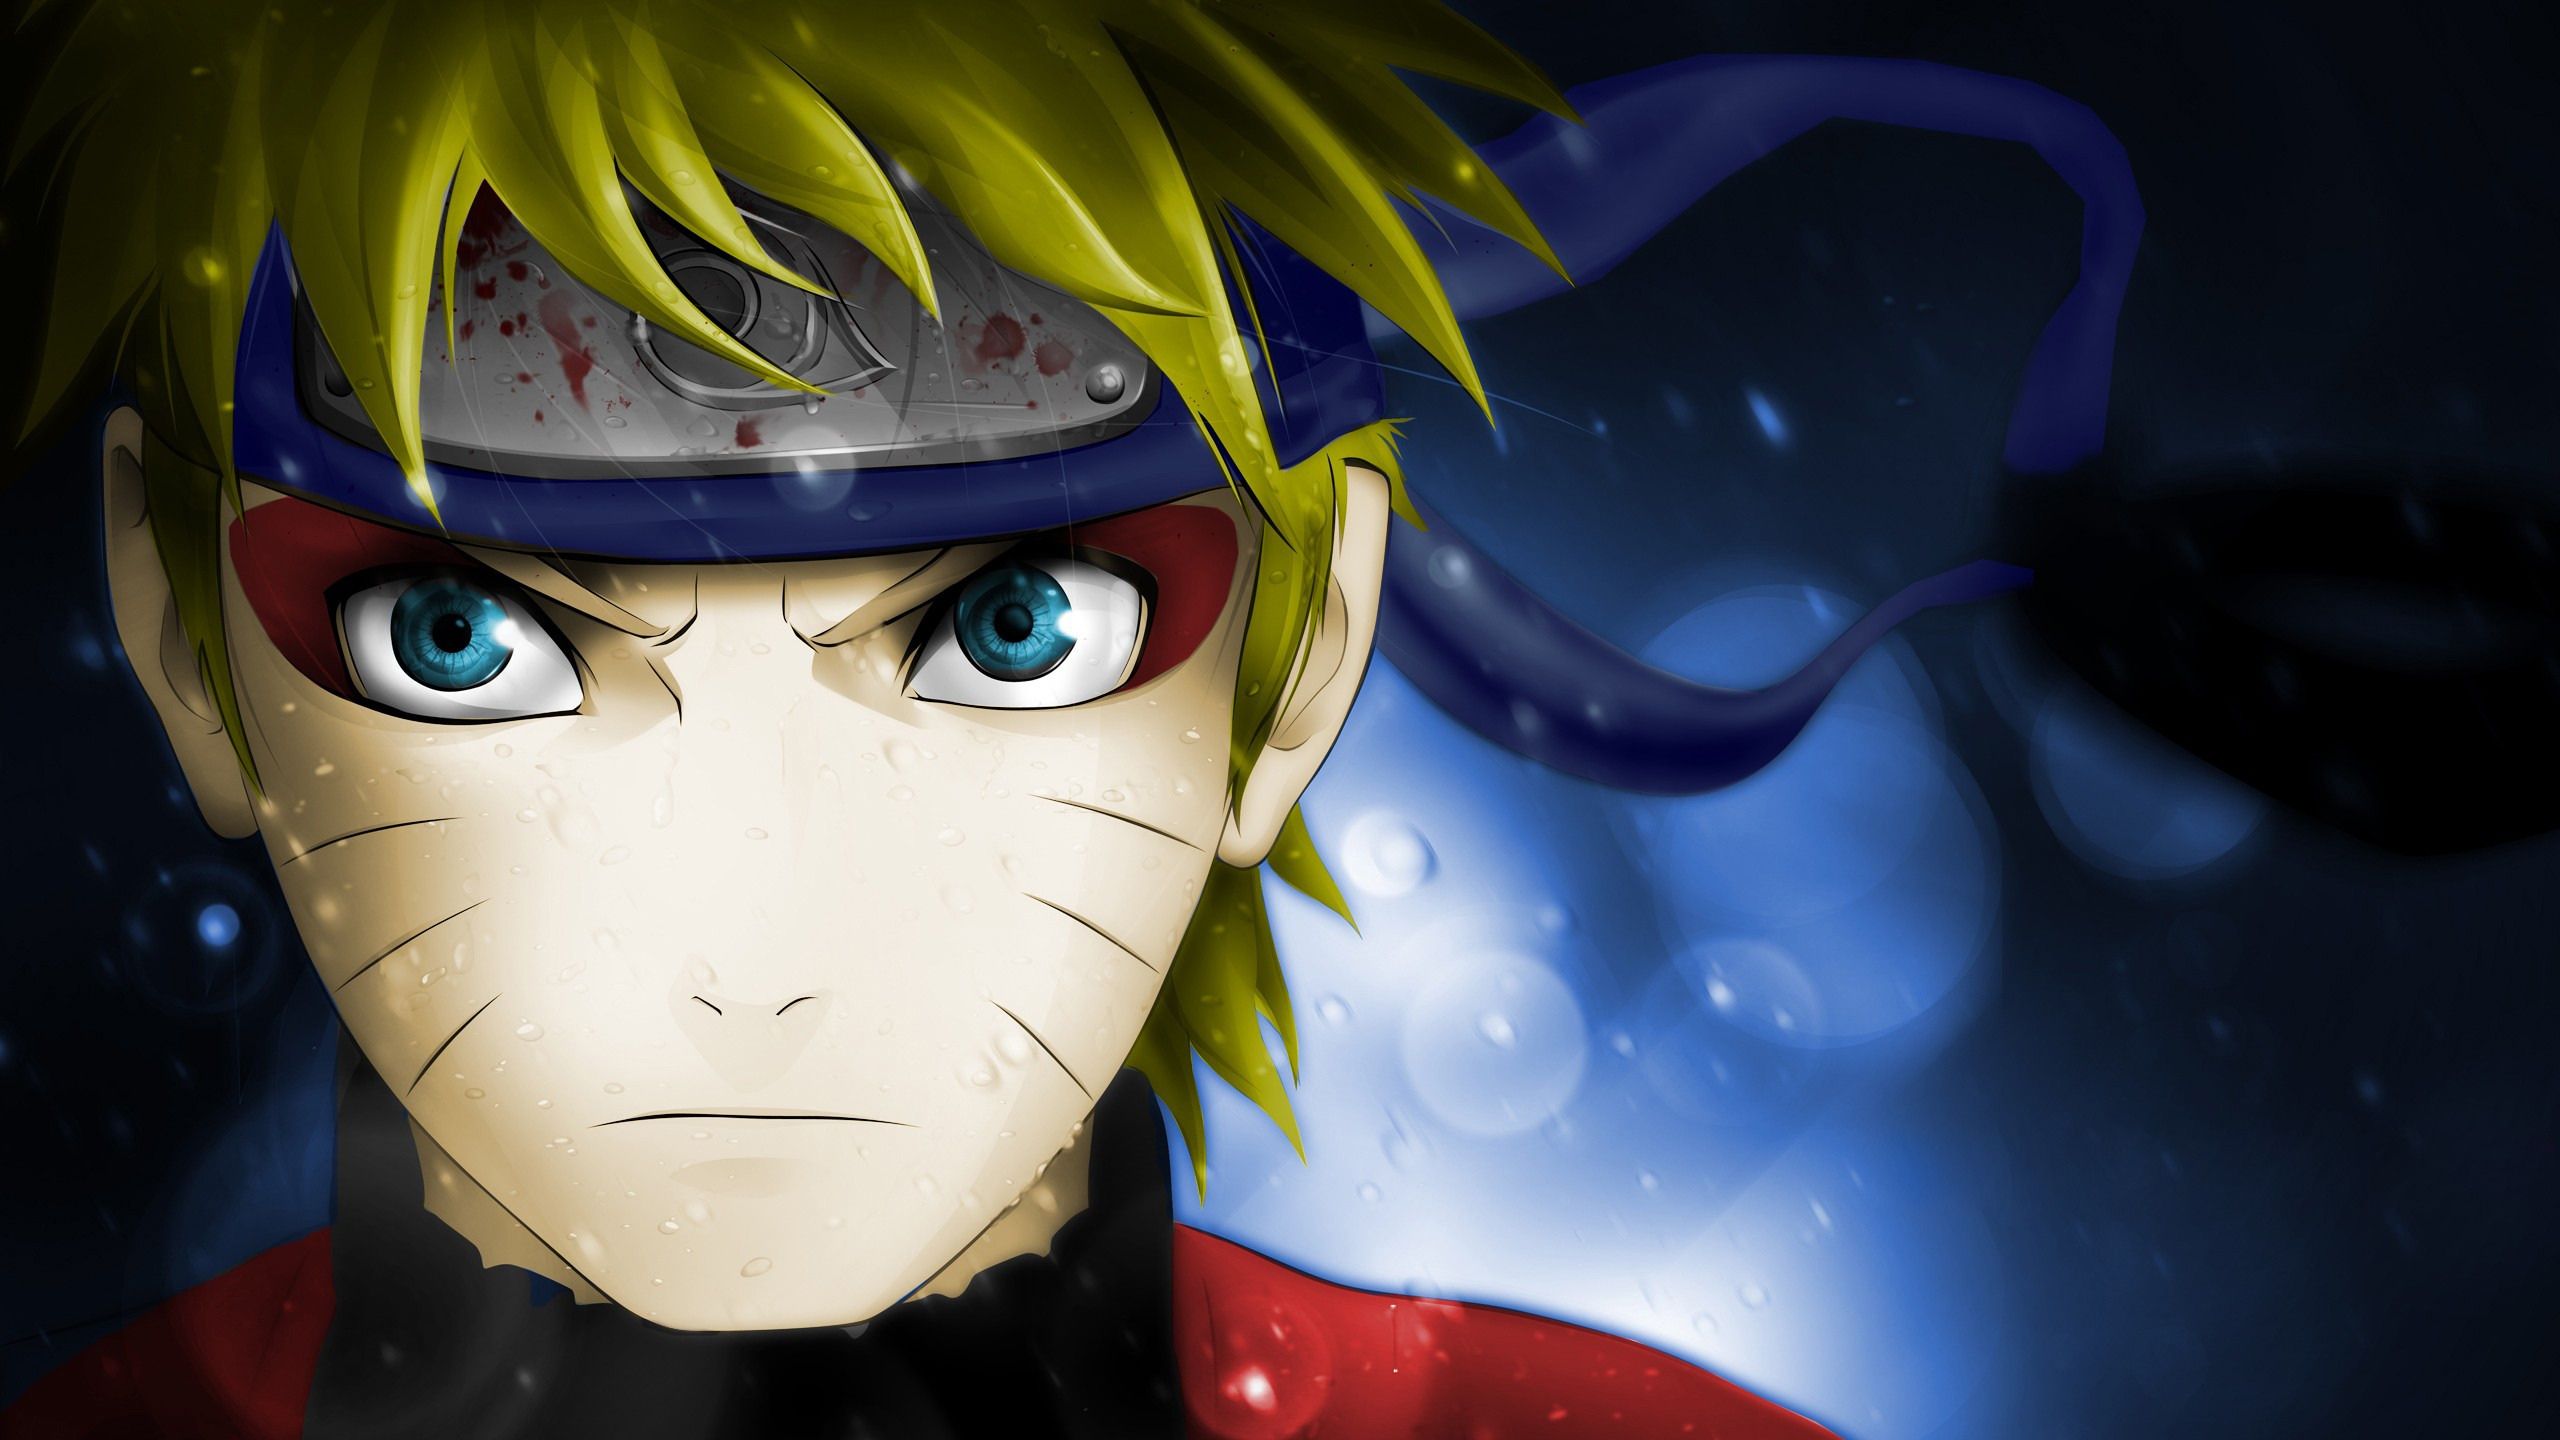 wallpapers Cool Best Anime Profile Naruto Profile Pictures naruto profile wallpapers wallpaper cave